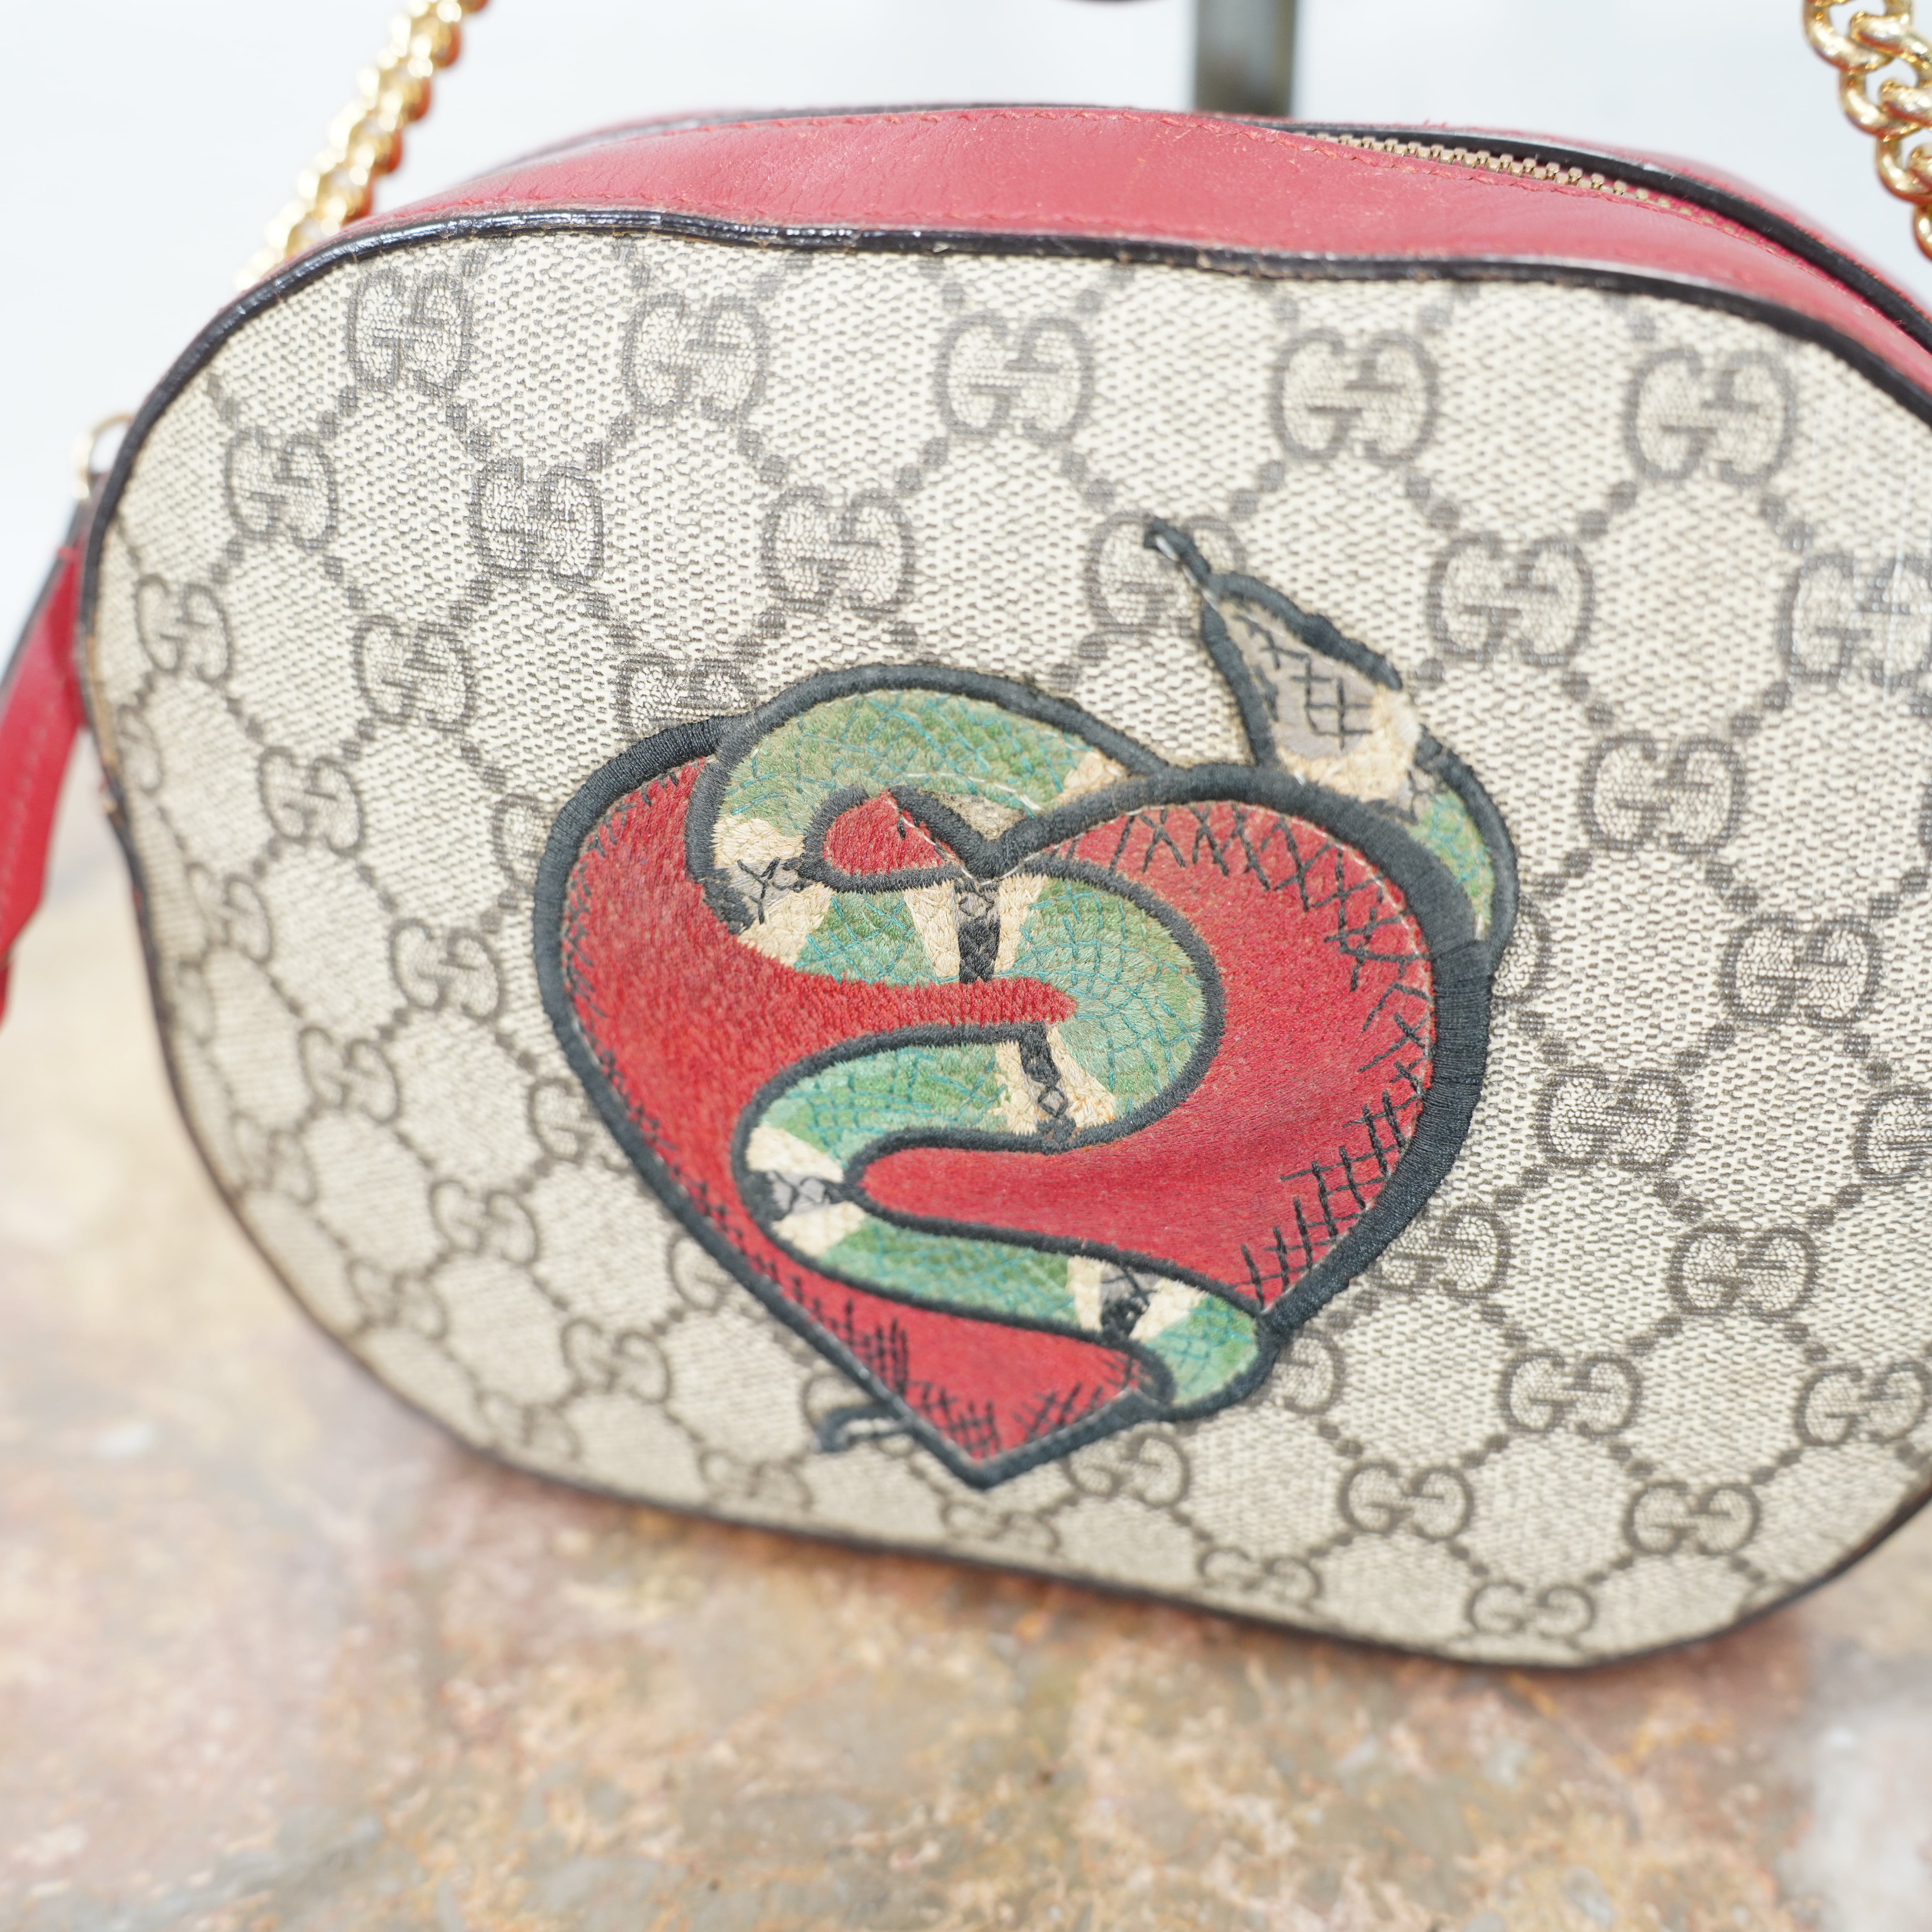 GUCCI GG PATTERNED SNAKE LOGO CHAIN SHOULDER BAG MADE IN ITALY